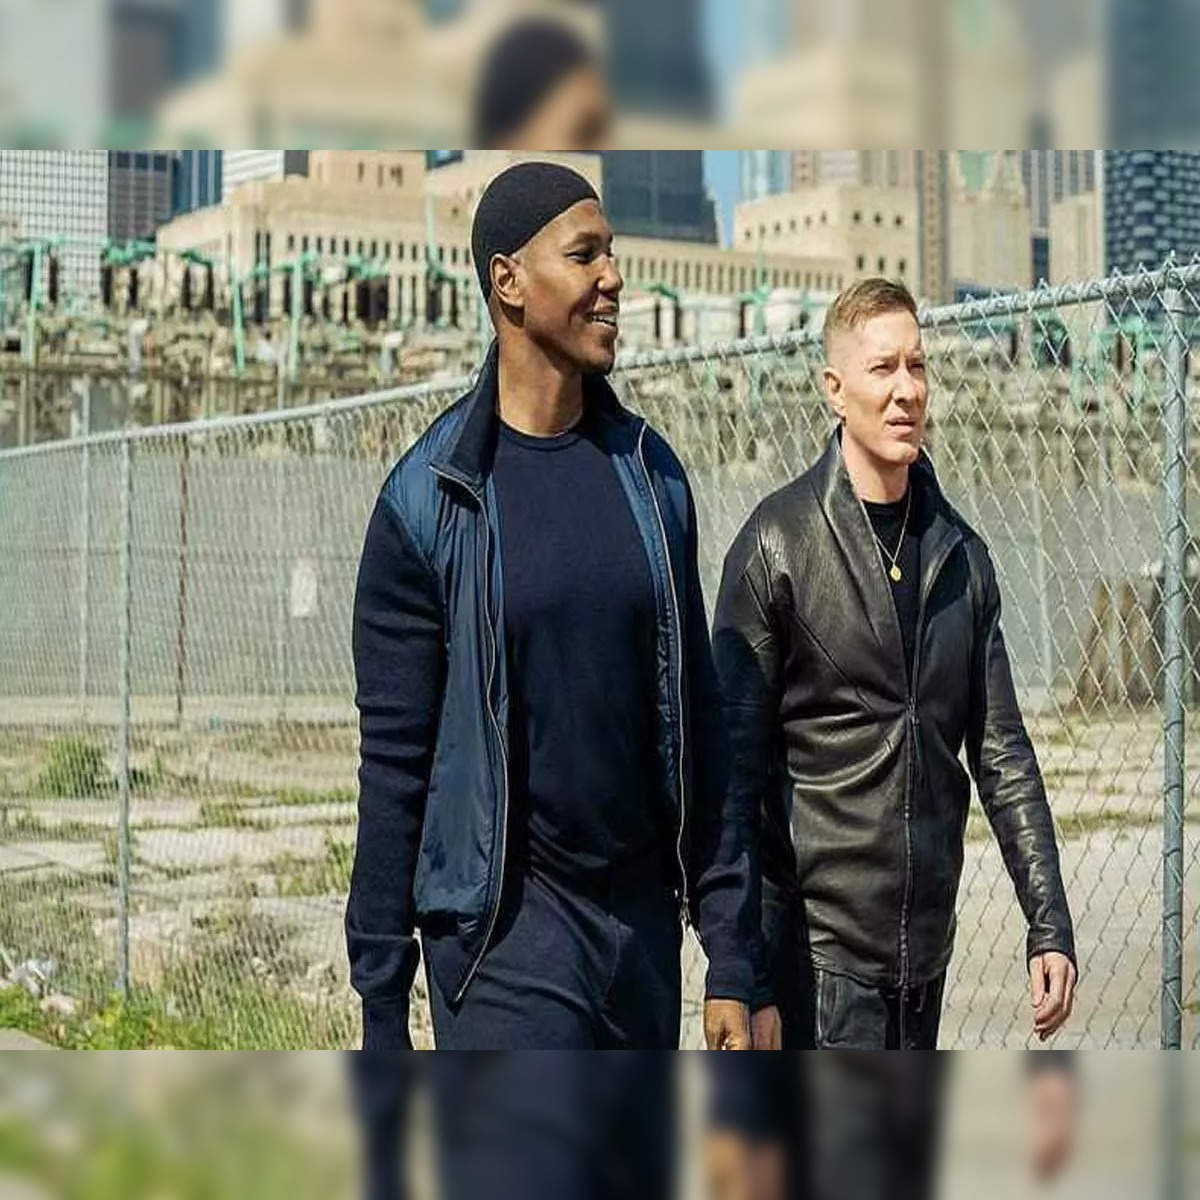 Power Book IV: Force, Official Trailer, Joseph Sikora, Lucien Cambric, Anthony